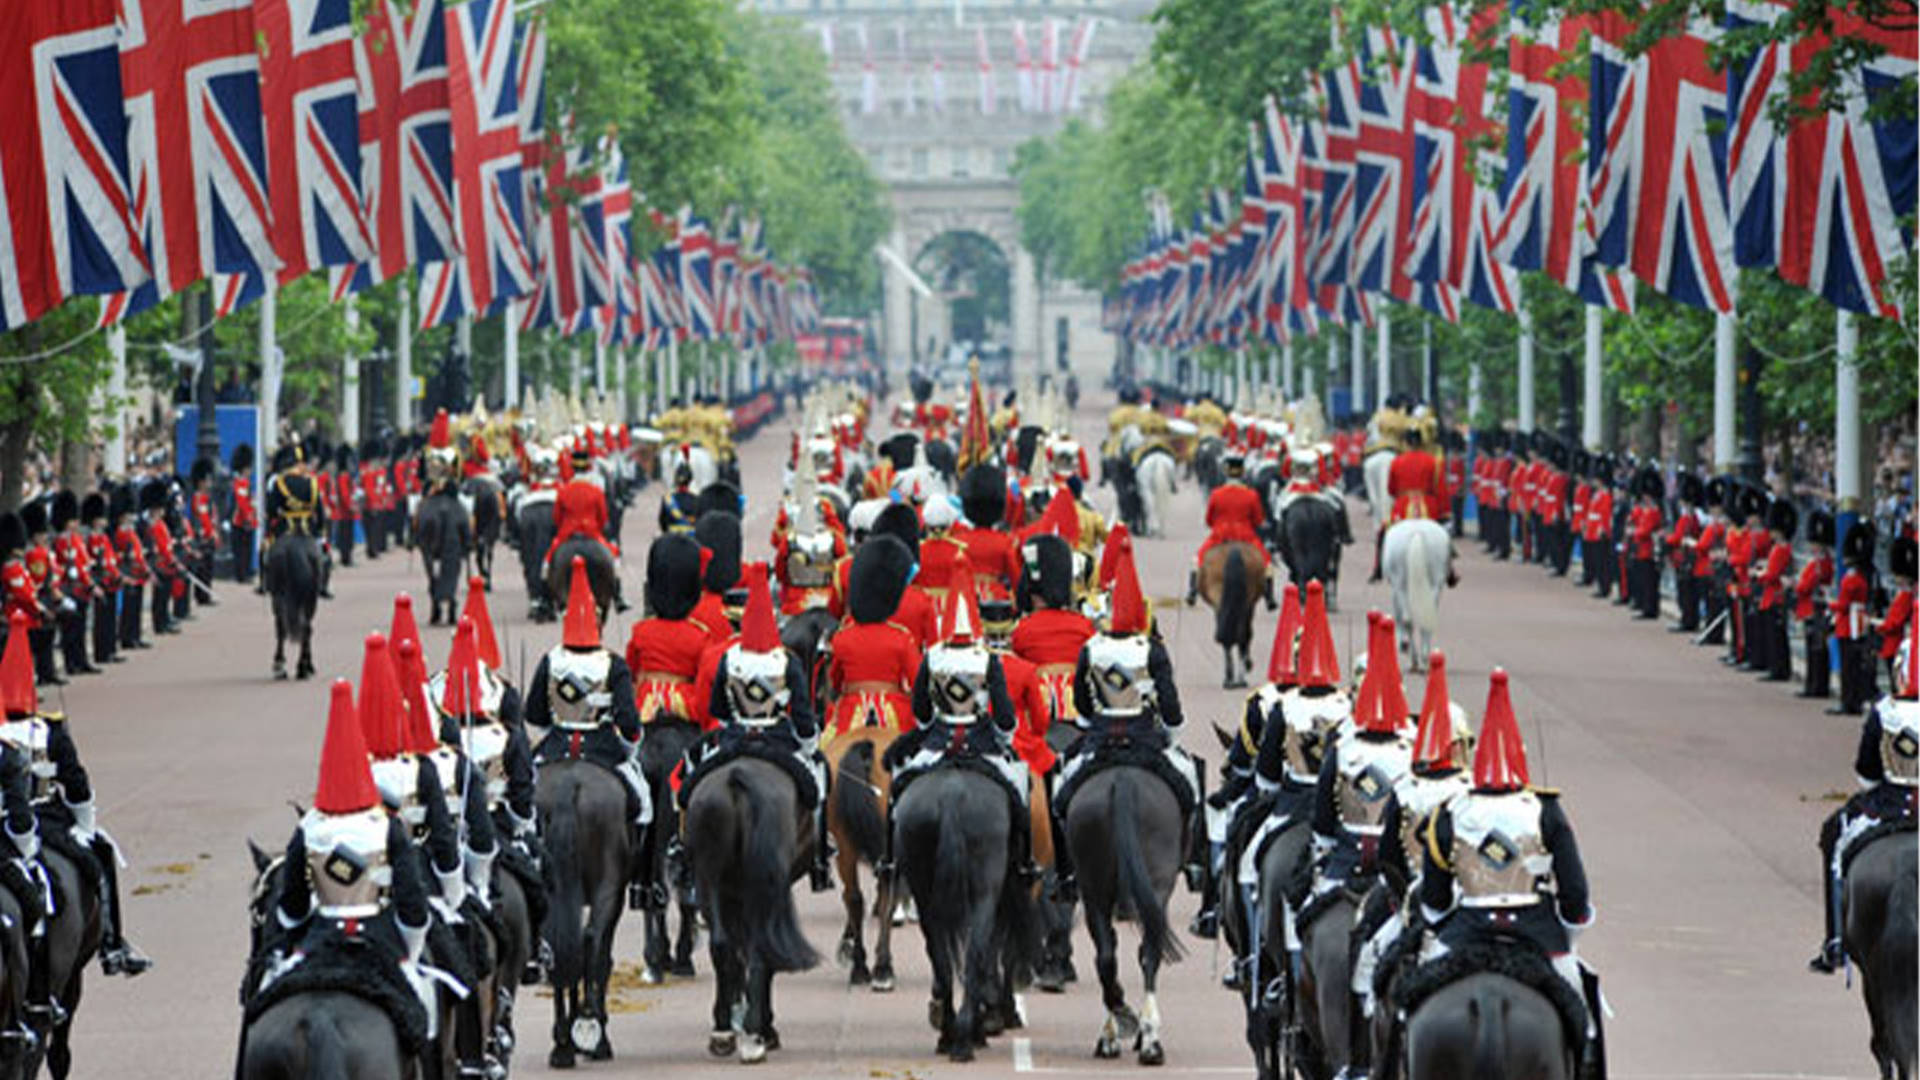 7 Pflichttermine in London - Trooping the Colour